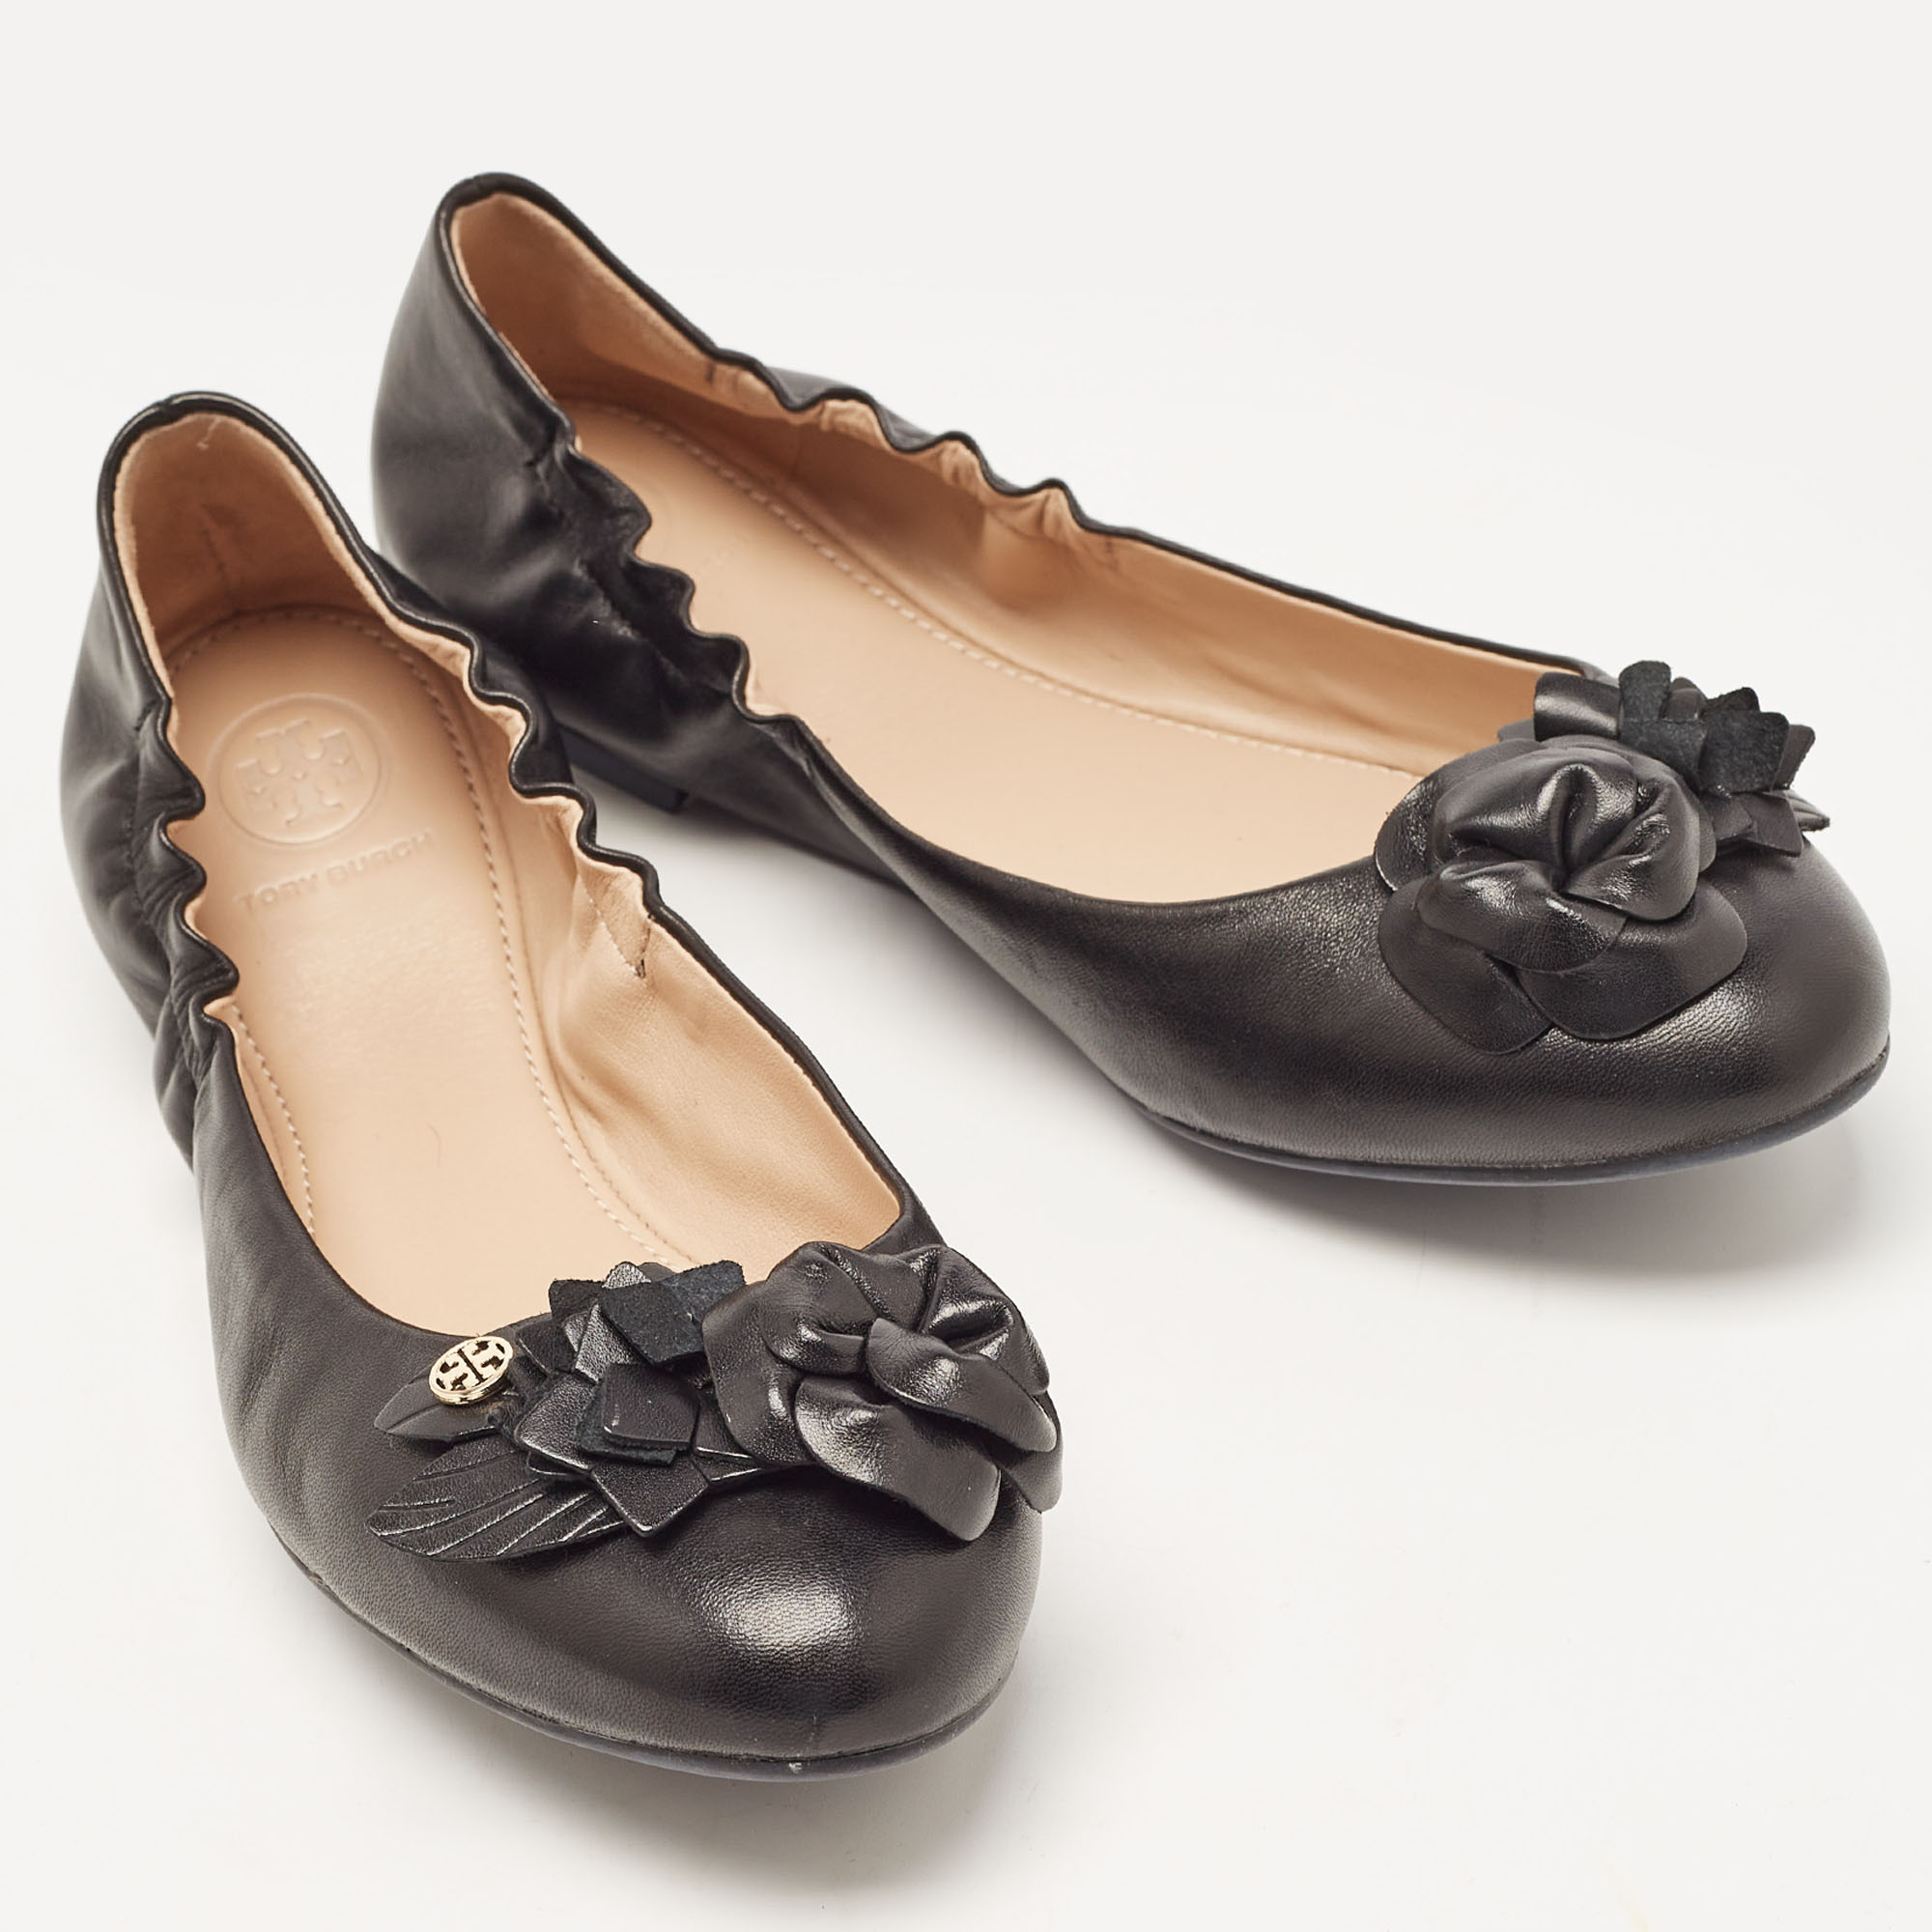 Tory Burch Black Leather Blossom Ballet Flats Size 39.5